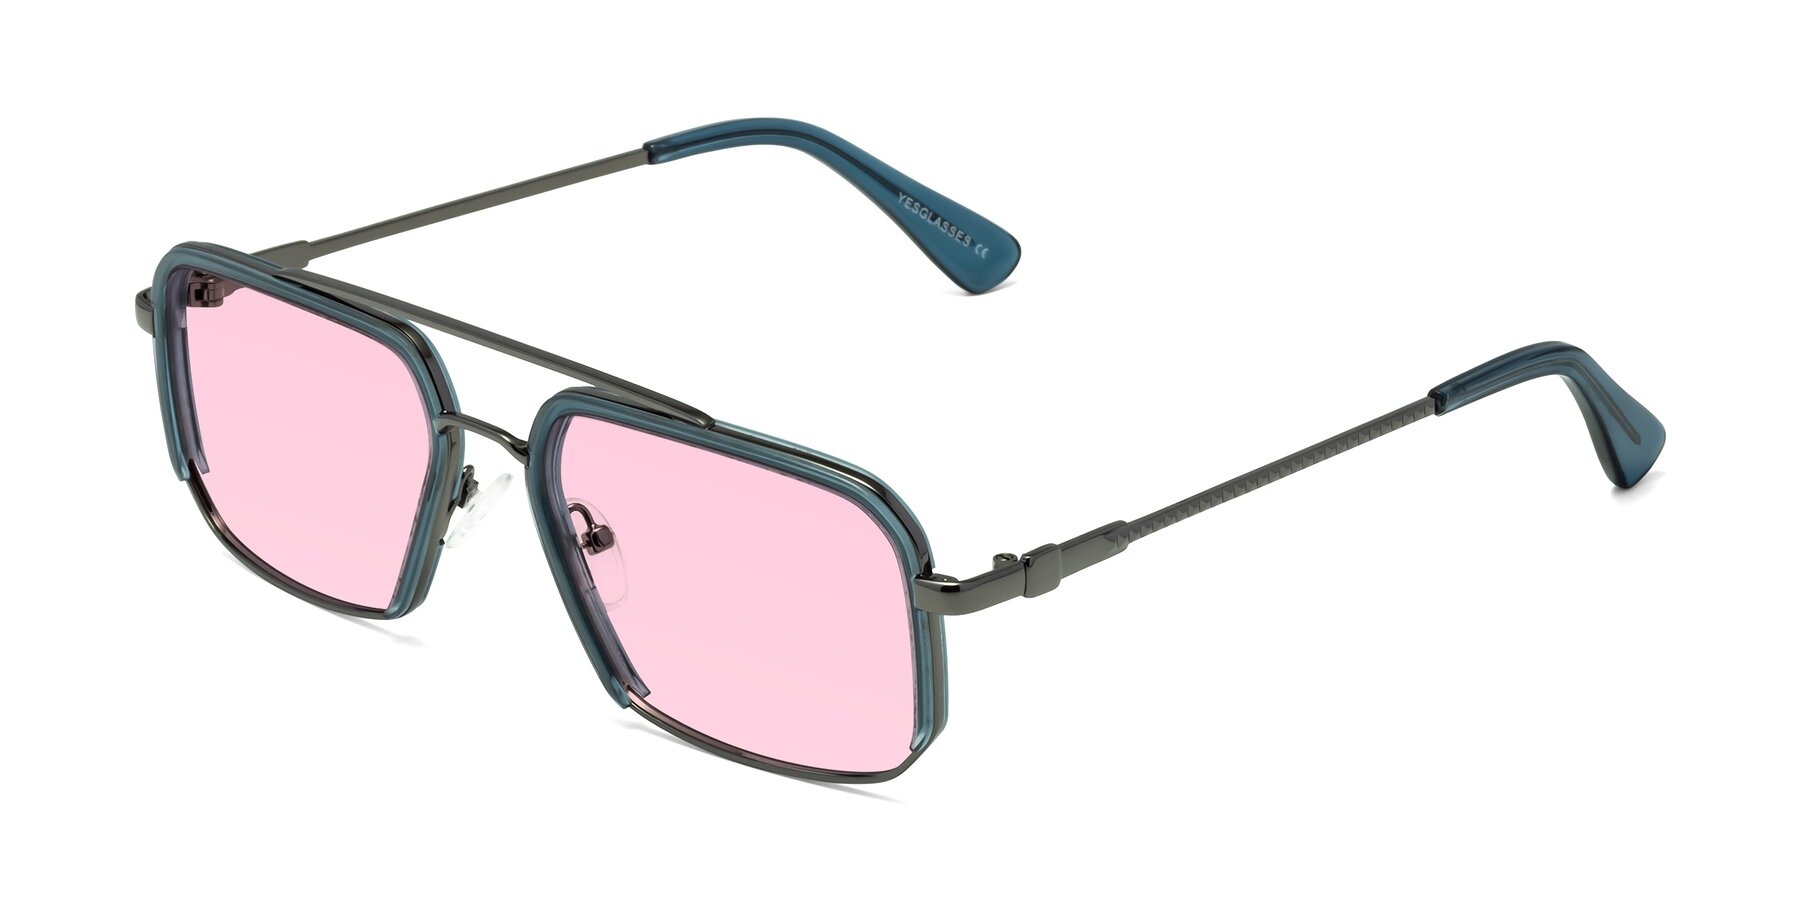 Angle of Dechter in Teal-Gunmetal with Light Pink Tinted Lenses